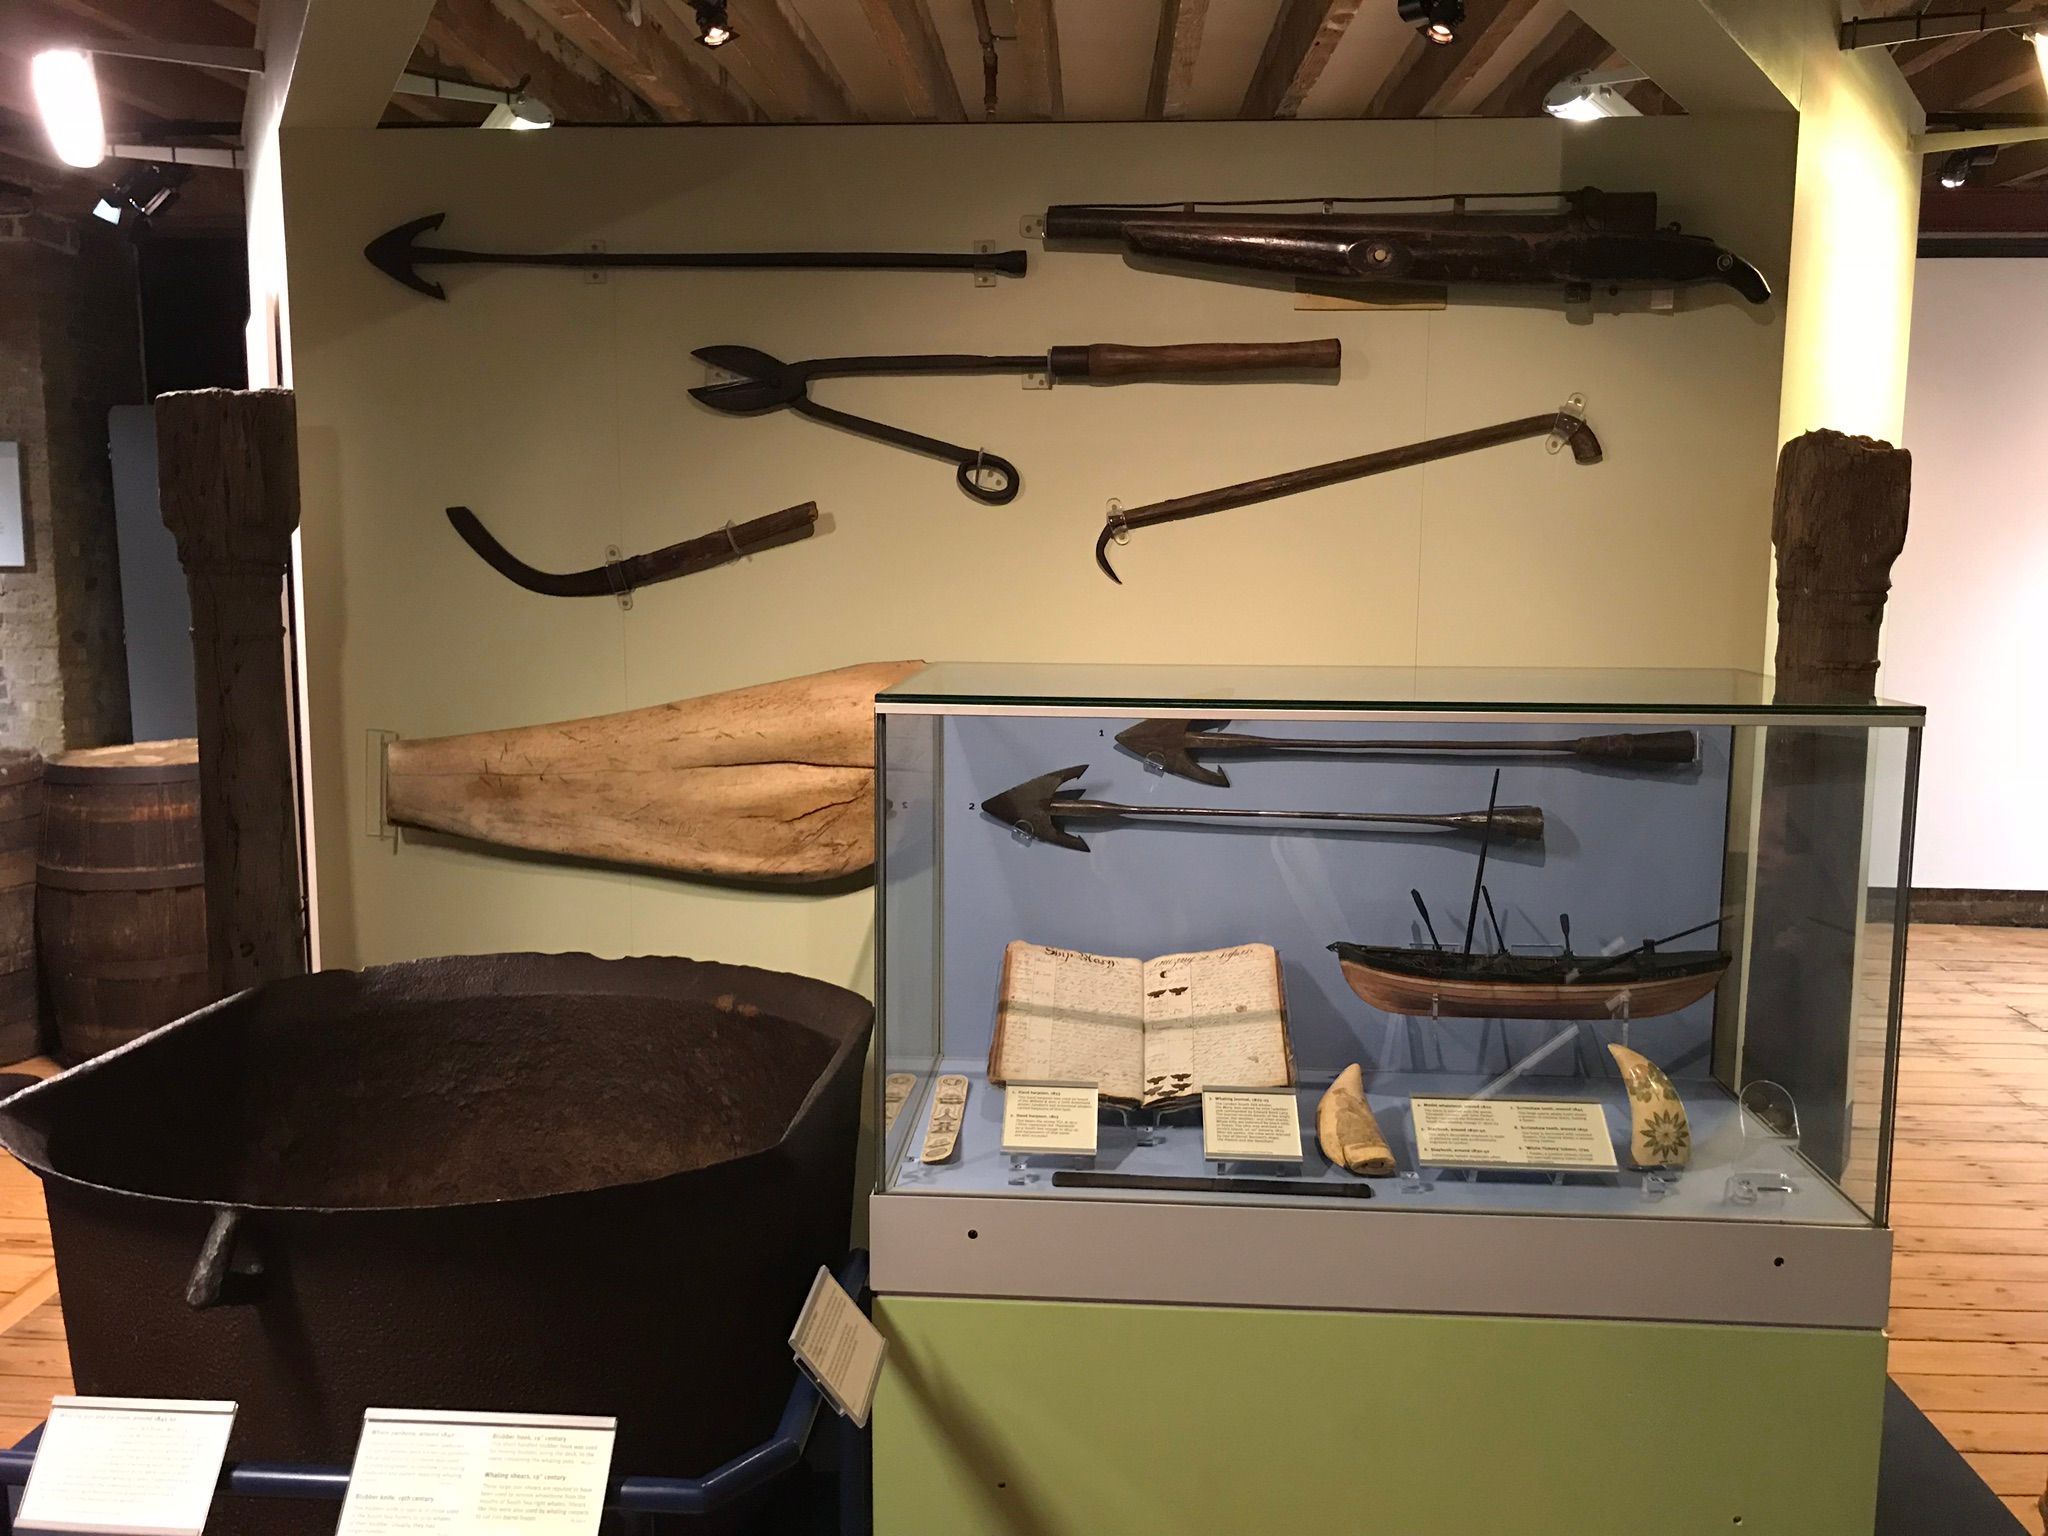 Selection of harpoons and tools used in whaling